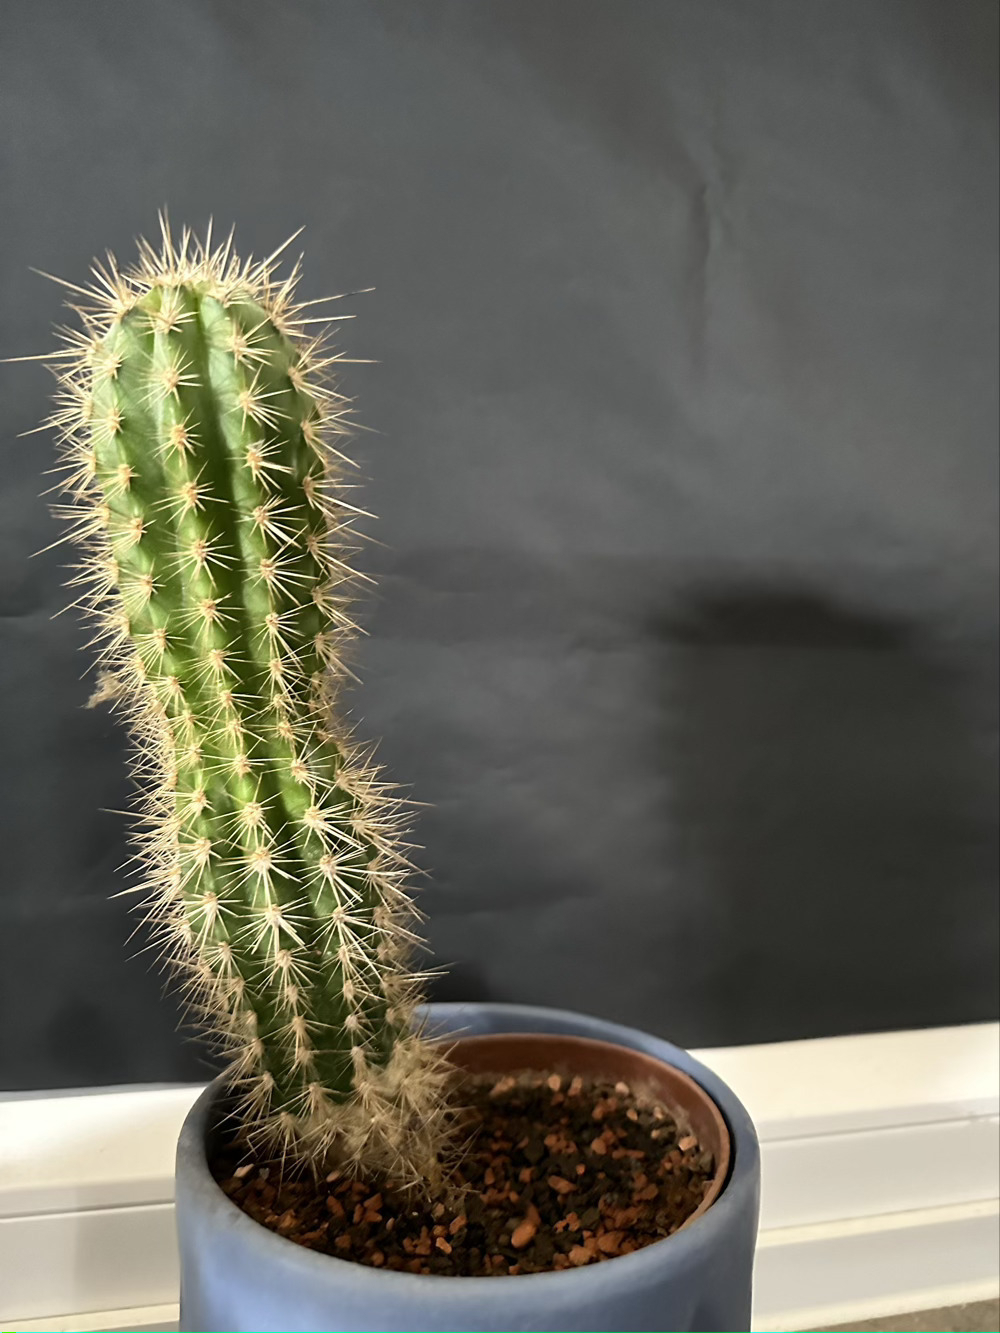 Small cactus plant sitting in front of a covered window.